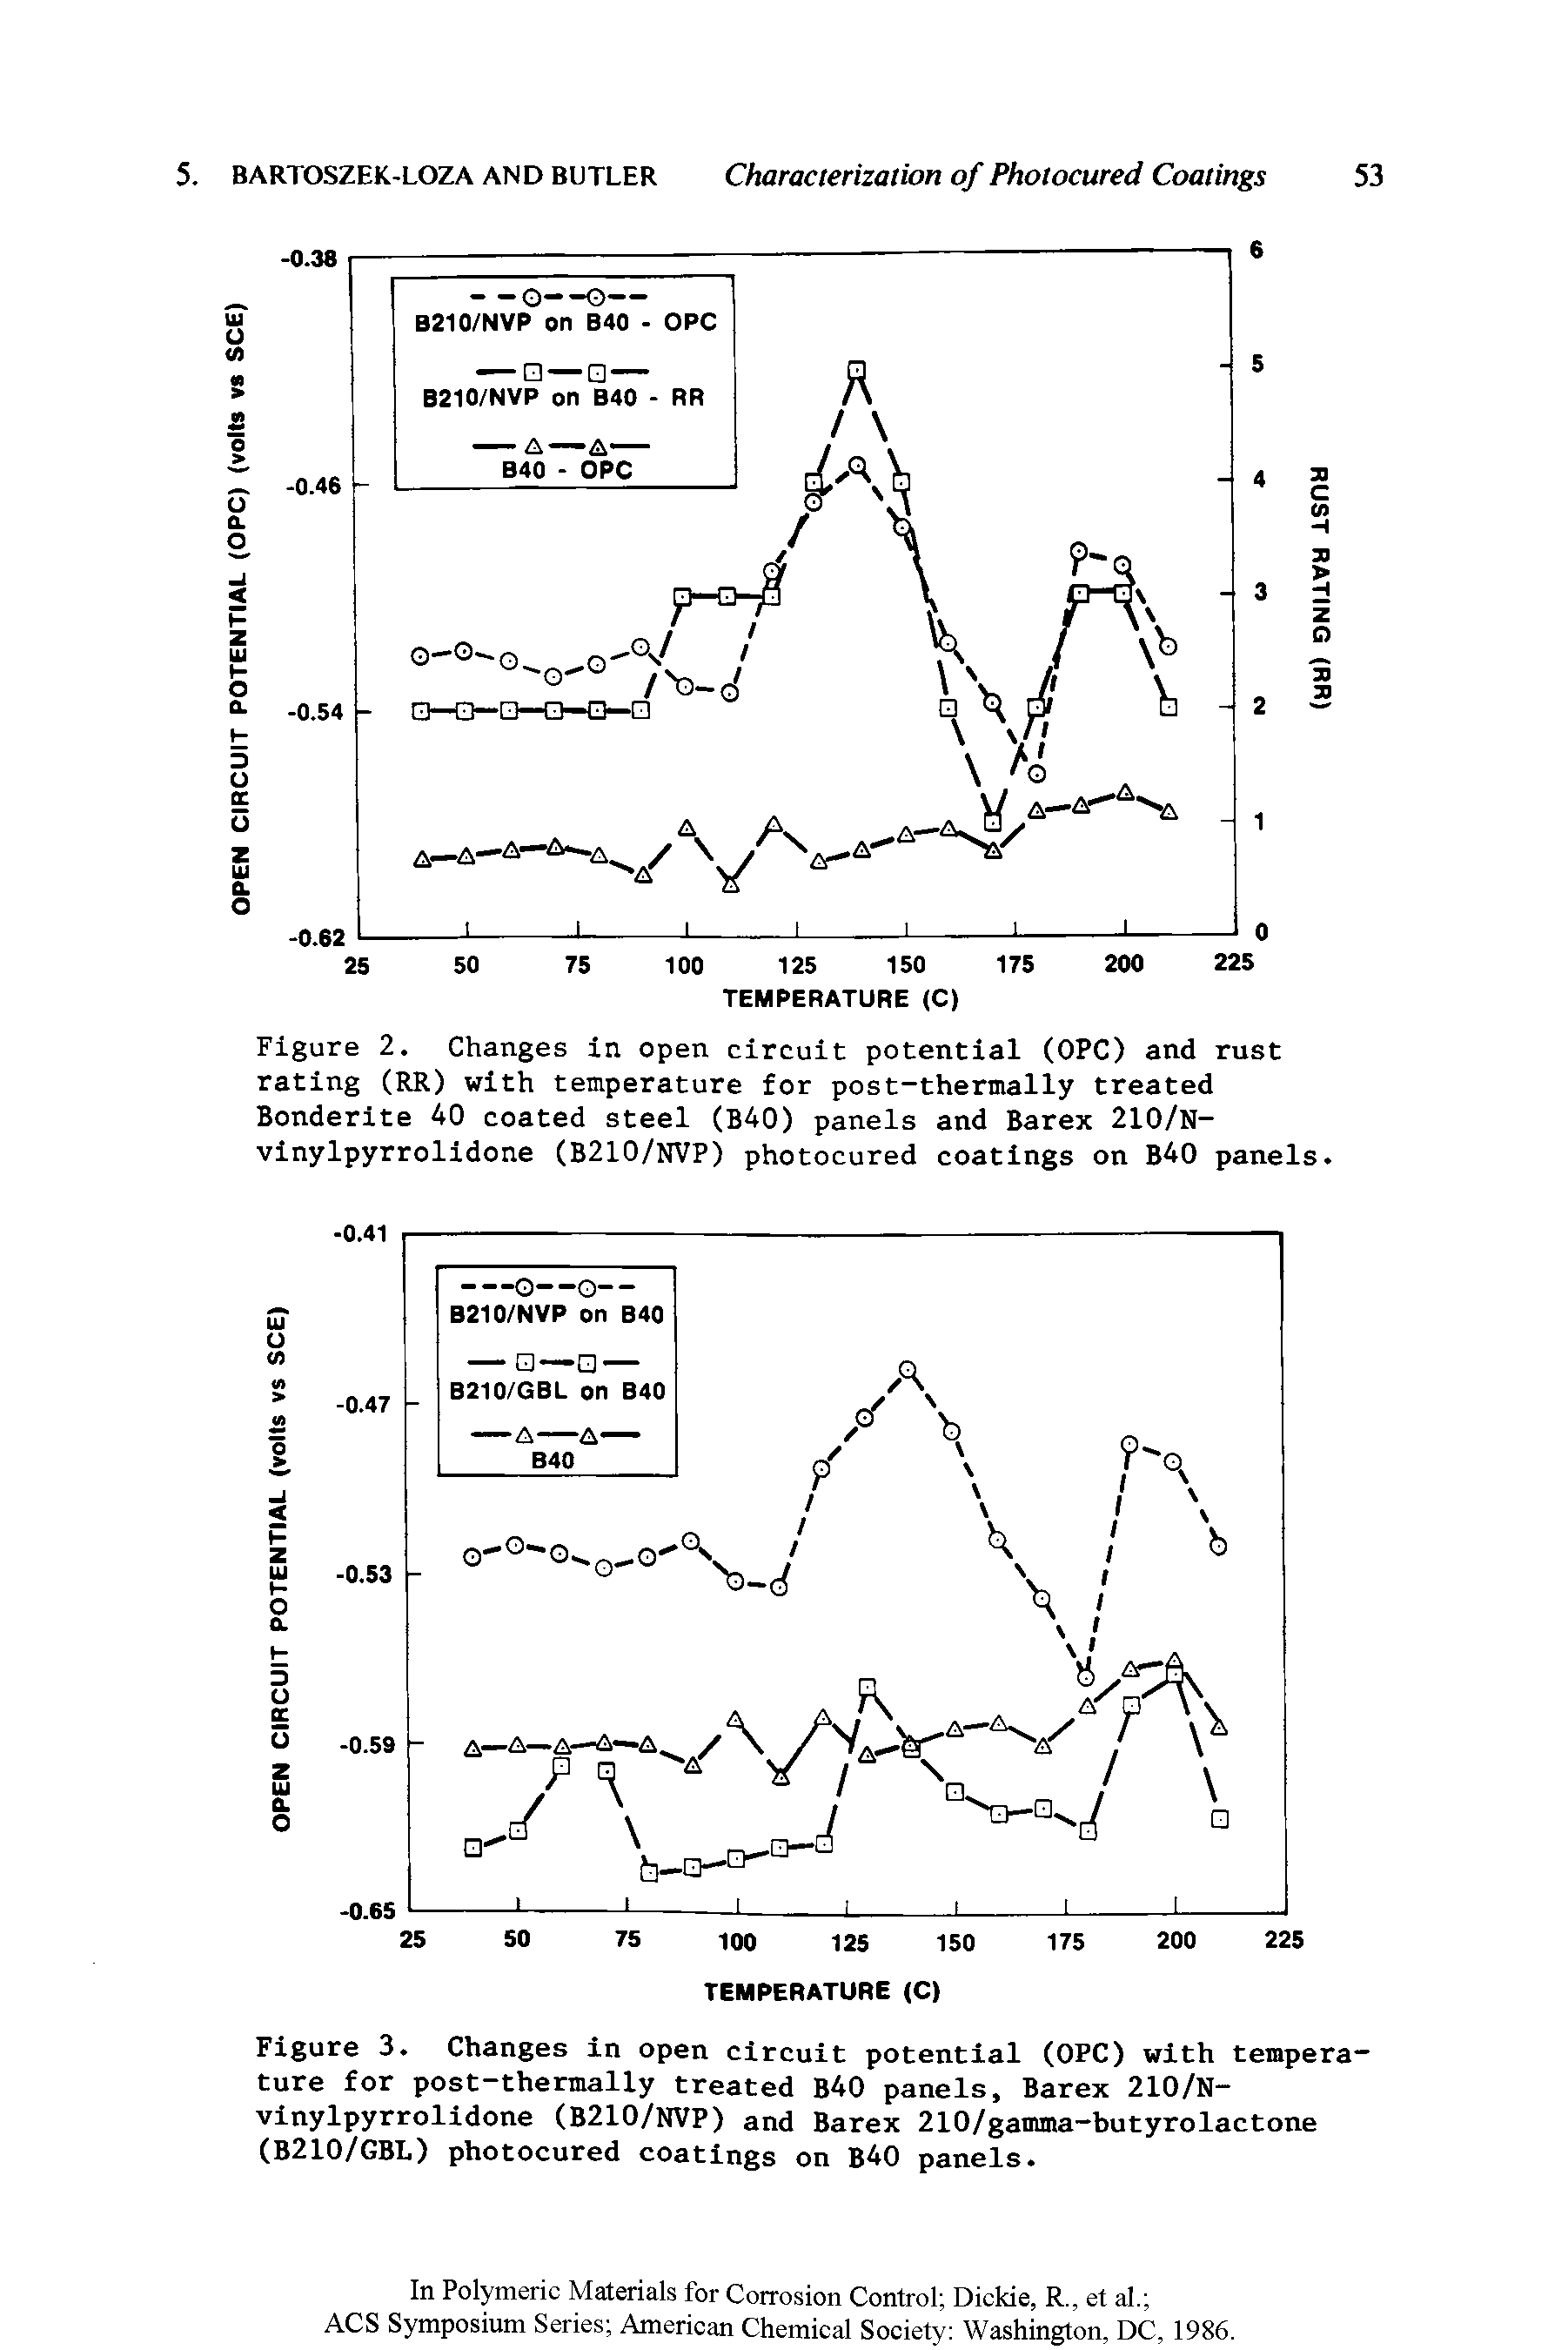 Figure 2. Changes in open circuit potential (OPC) and rust rating (RR) with temperature for post-thermally treated Bonderite 40 coated steel (B40) panels and Barex 210/N-vinylpyrrolidone (B210/NVP) photocured coatings on B40 panels.